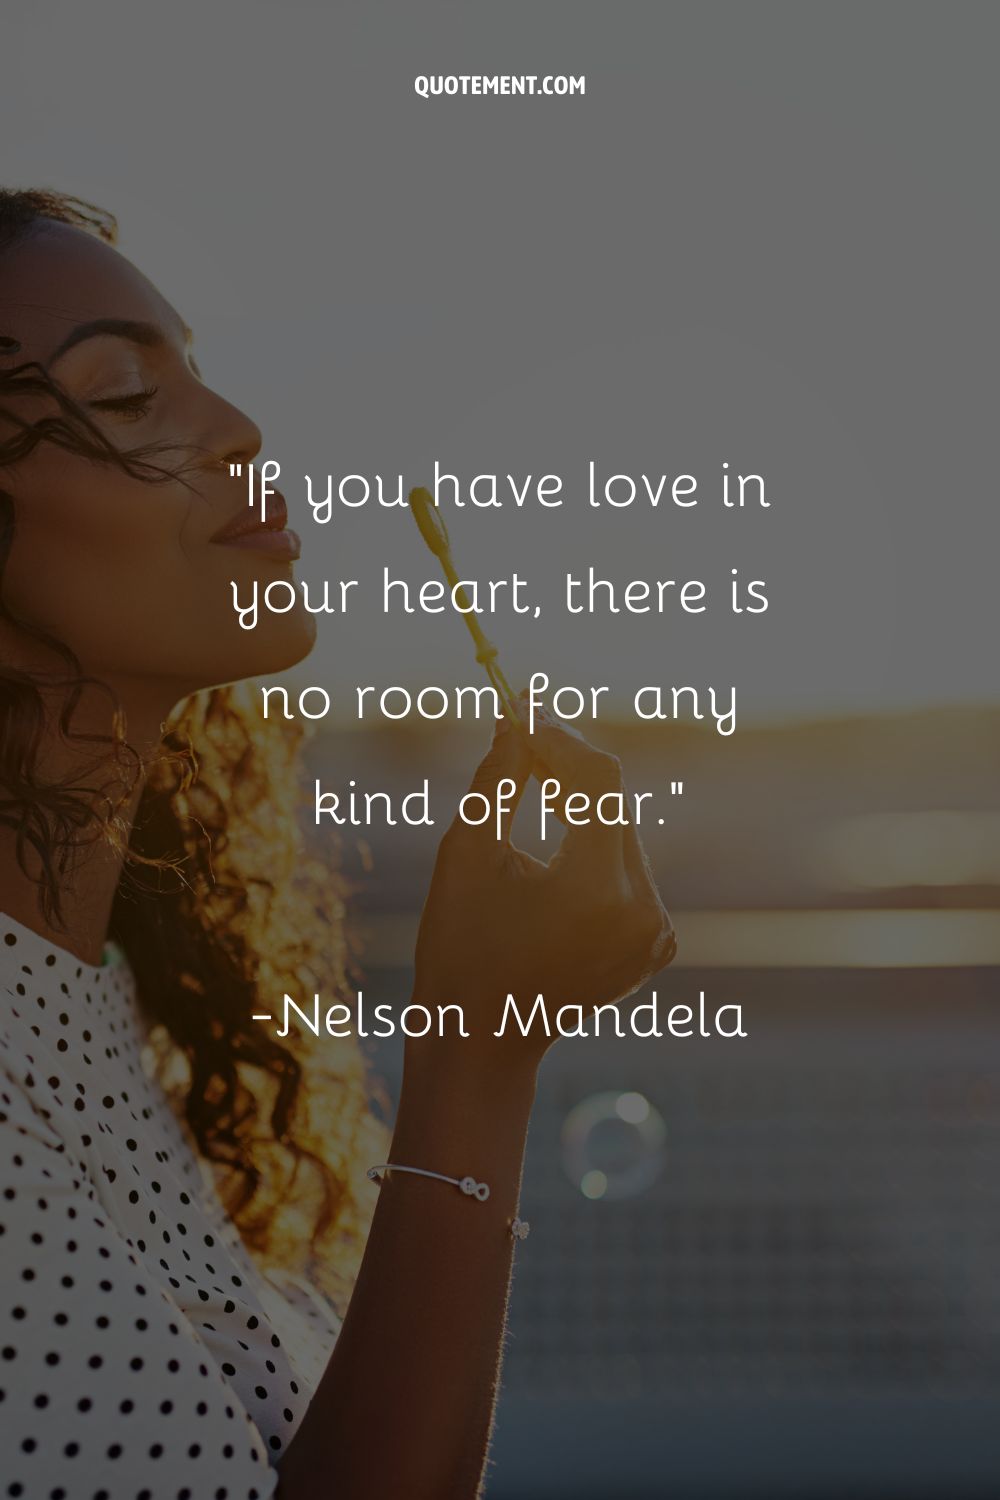 If you have love in your heart, there is no room for any kind of fear